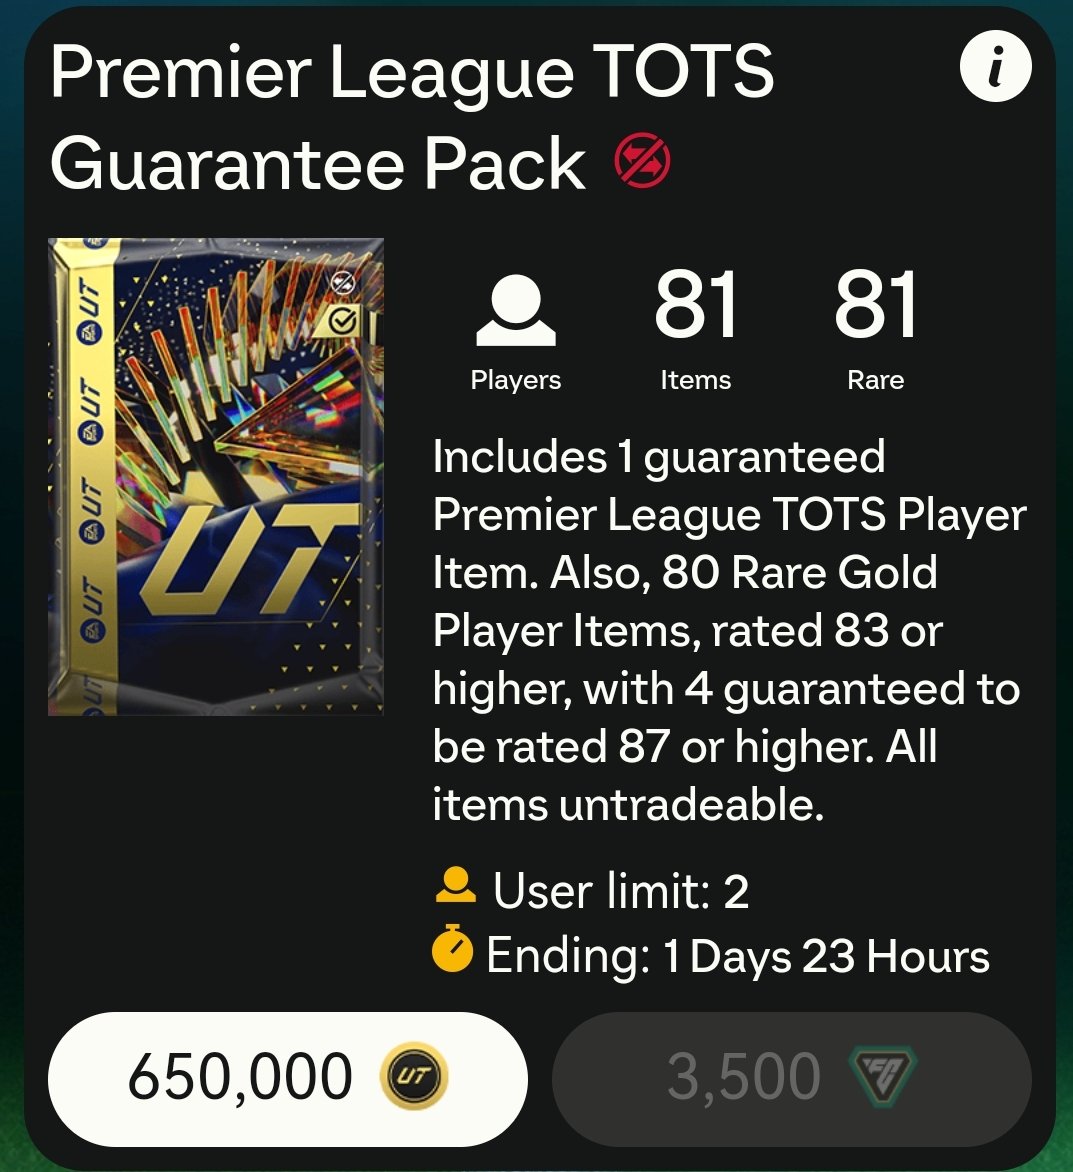 🚨💸 Quick GIVEAWAY
3x Premier League TOTS Guaranteed points

👉🏻 Follow @dbaboosting
👉🏻 RT this post 
👉🏻 RT the pinned post

🧑🏻‍🍳 Winners will be messaged after the BVB-PSG.
*Make sure we can message you!!

#FC24